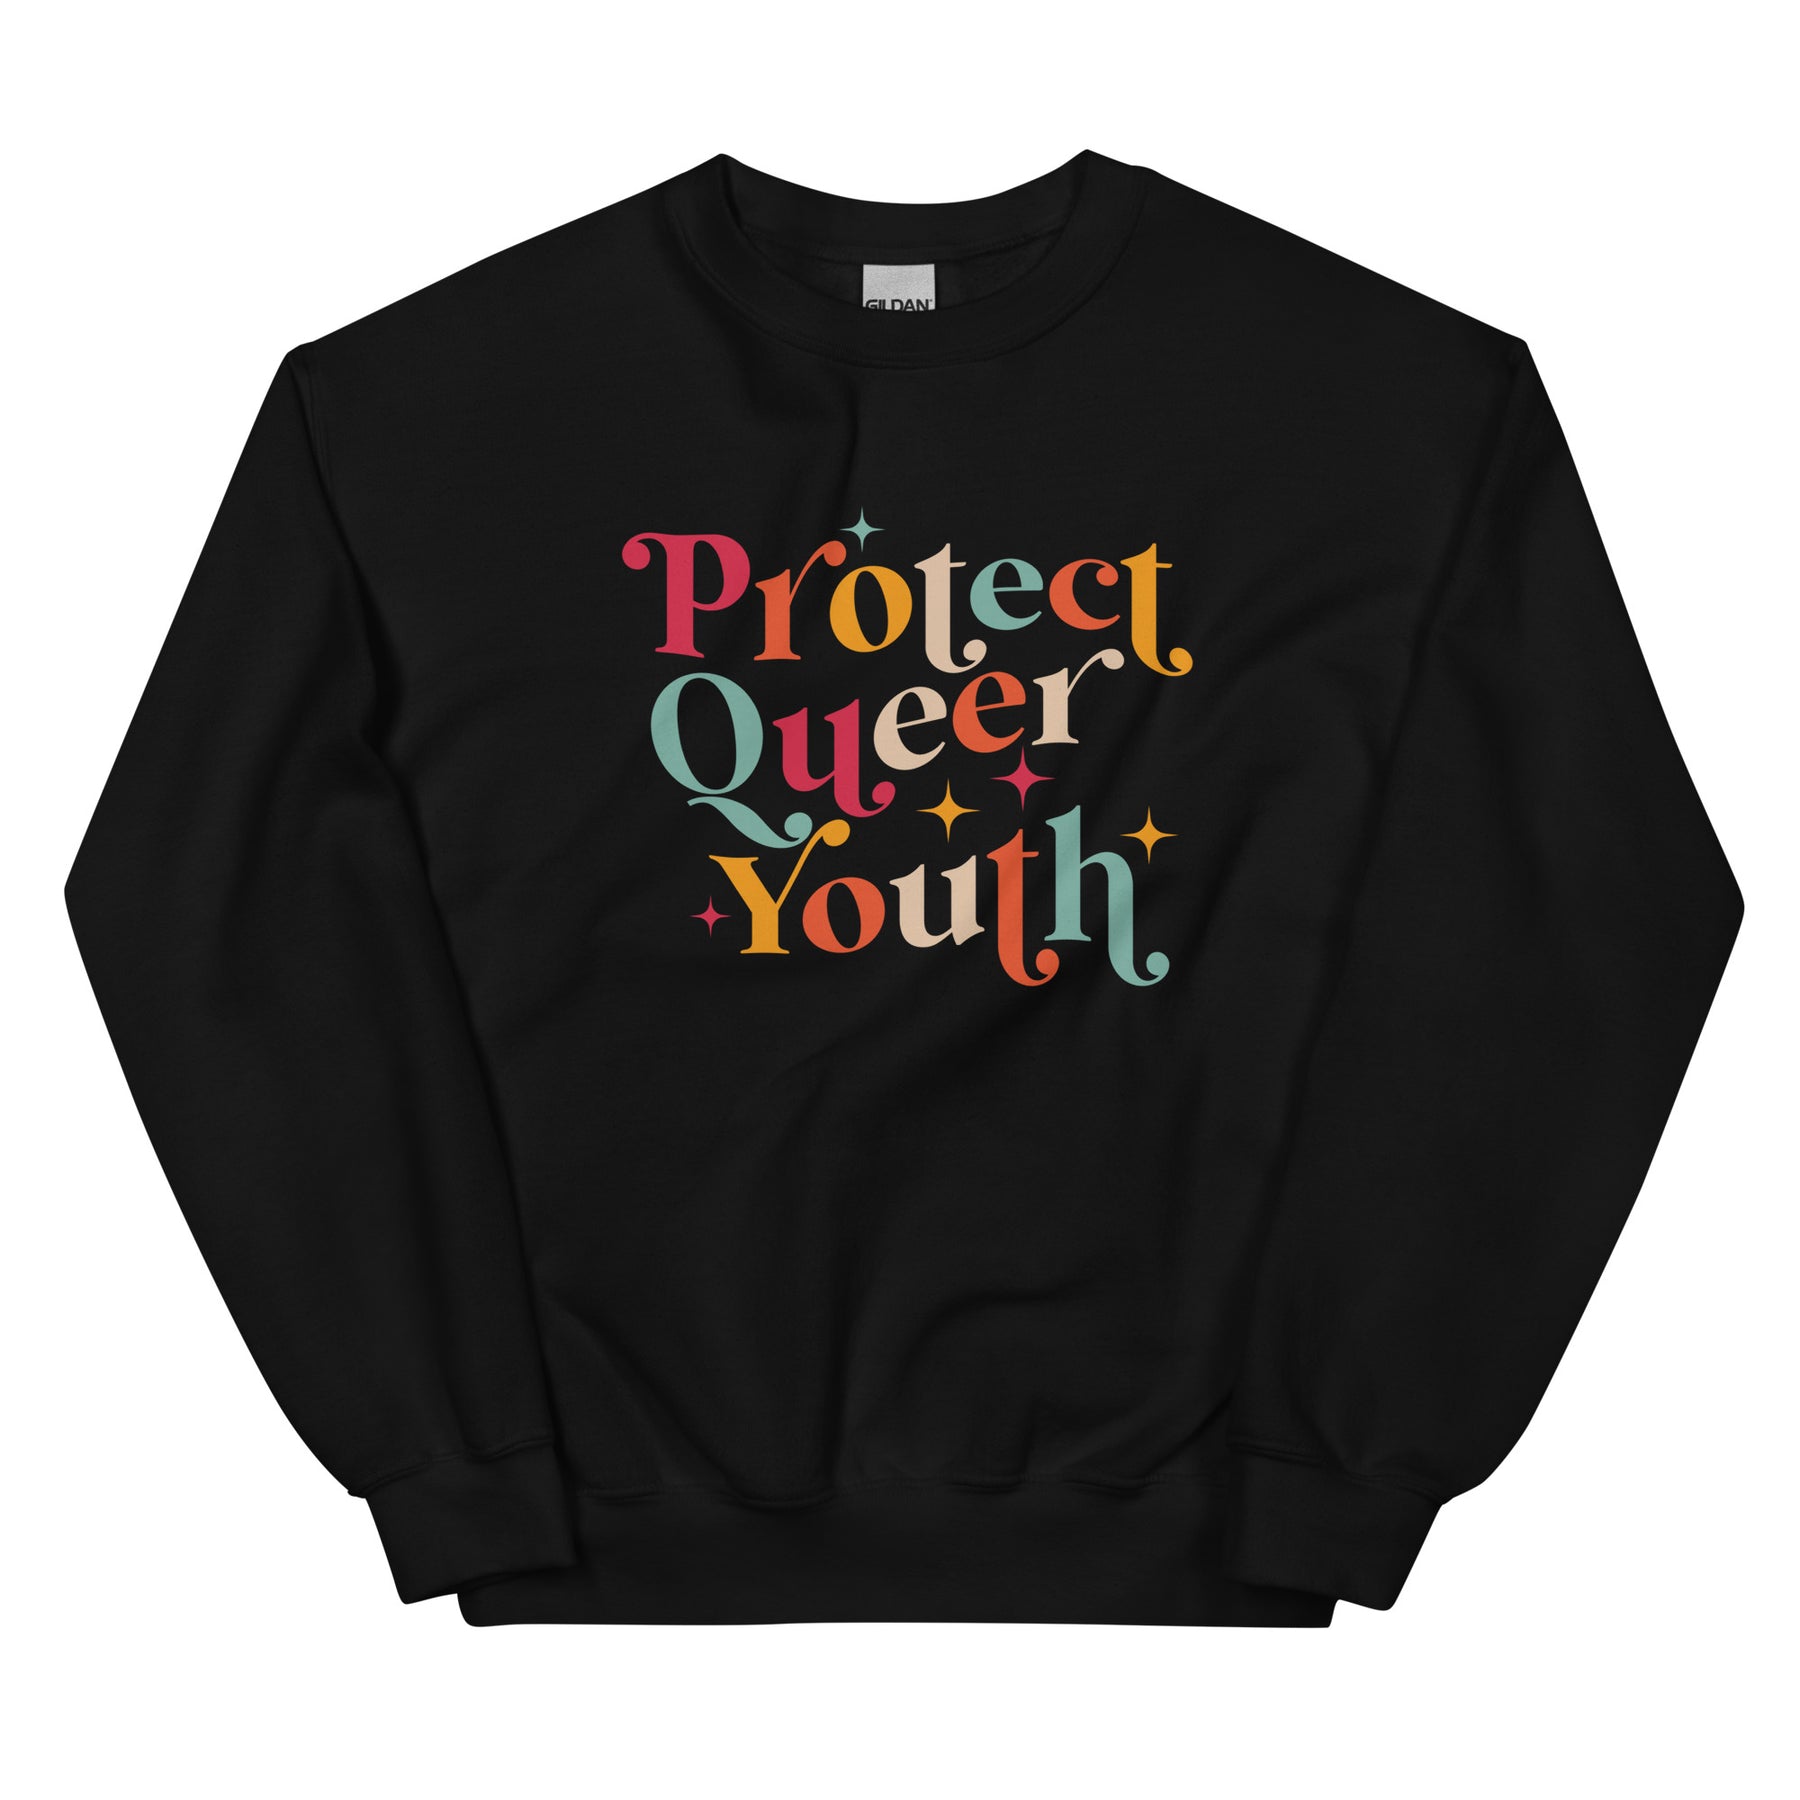 Protect Queer Youth Sweatshirt